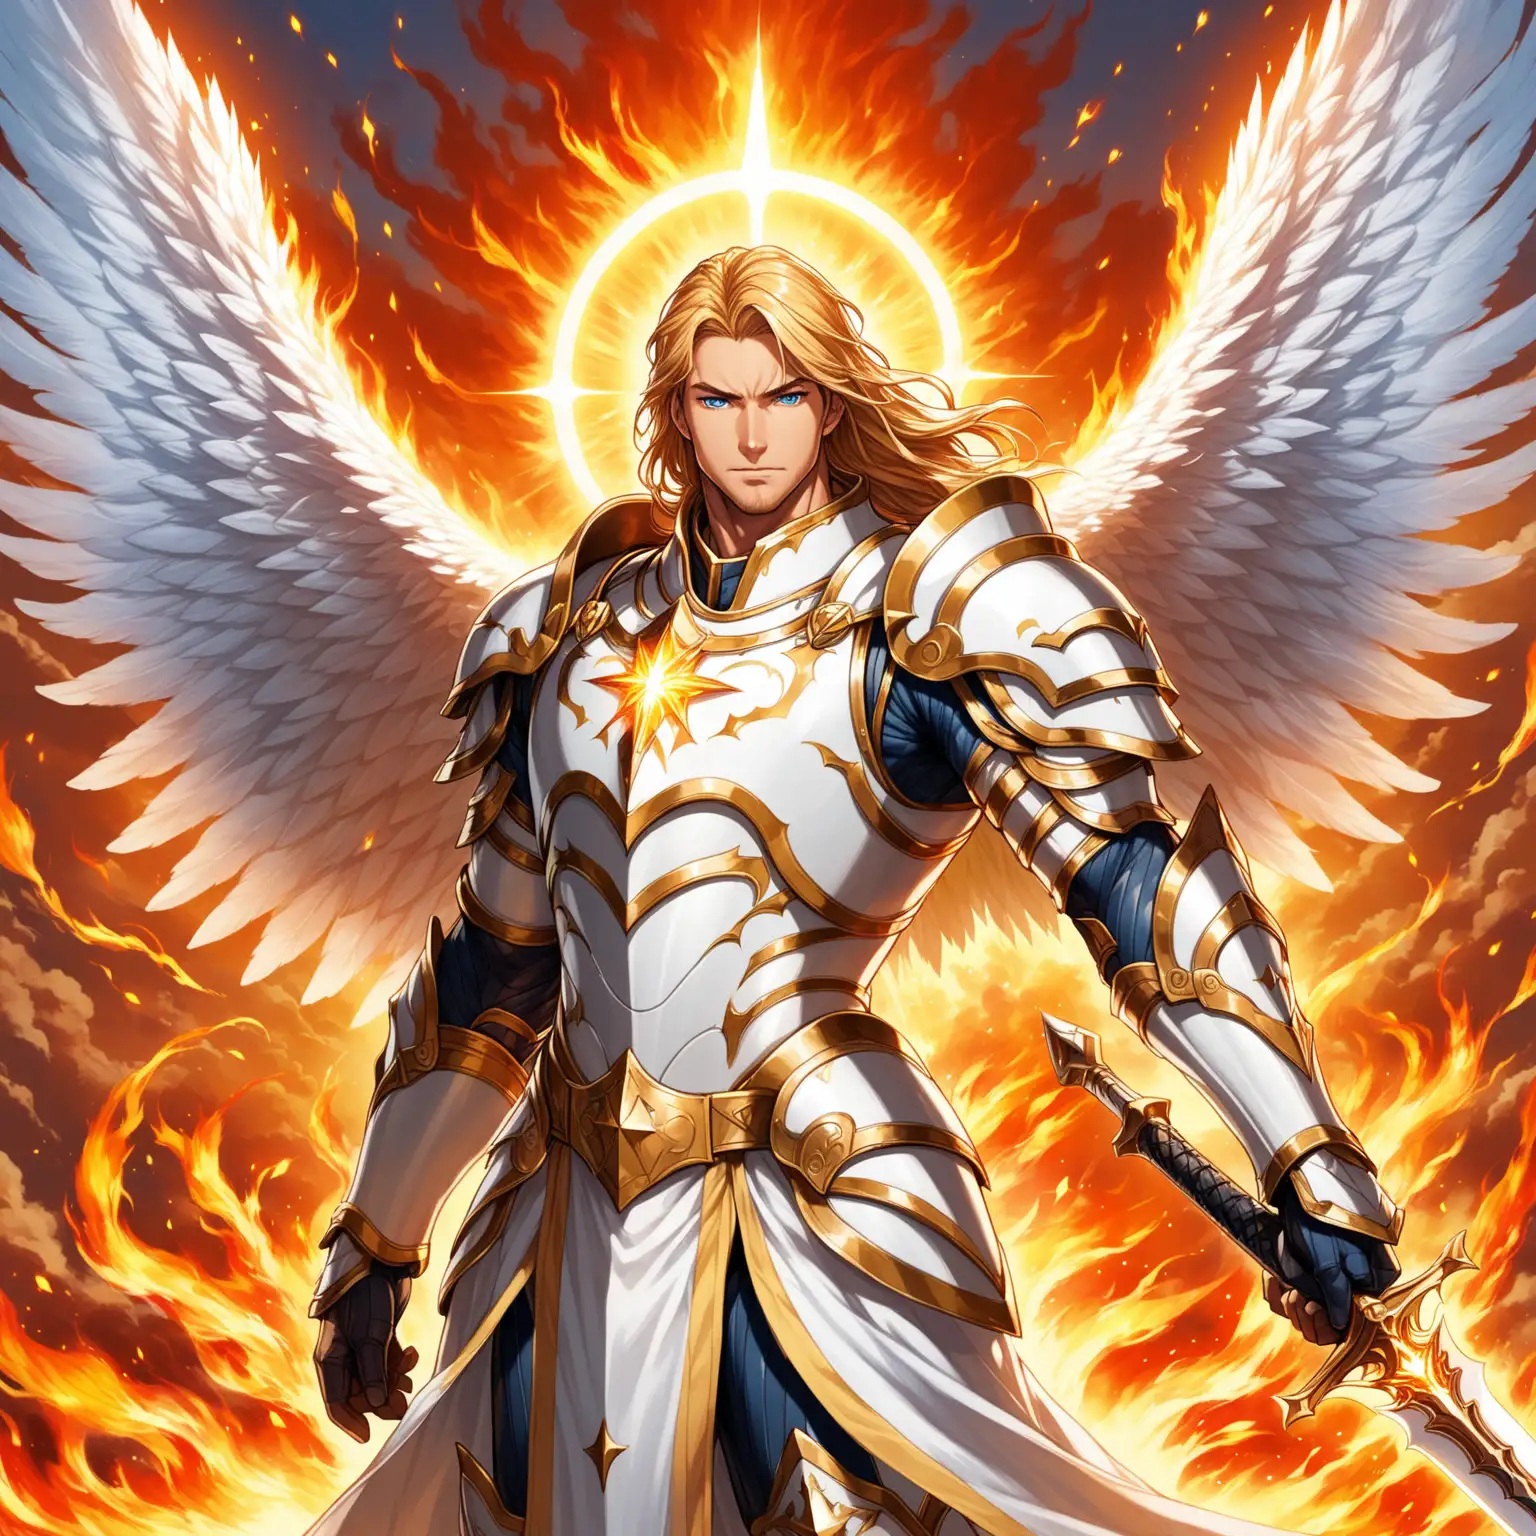 1 man. He is the god of Dawn and Hope and a paladin. He is an angel with huge wings made of fire and a halo of light. He is handsome and muscular. He has long straight gold hair and light blue eyes. He is wearing white knight armor with gold trim. He has a great sword and the blade is on fire. He is flying in the sky and it's Dawn. He is not wearing a helmet. He has a serious expression.